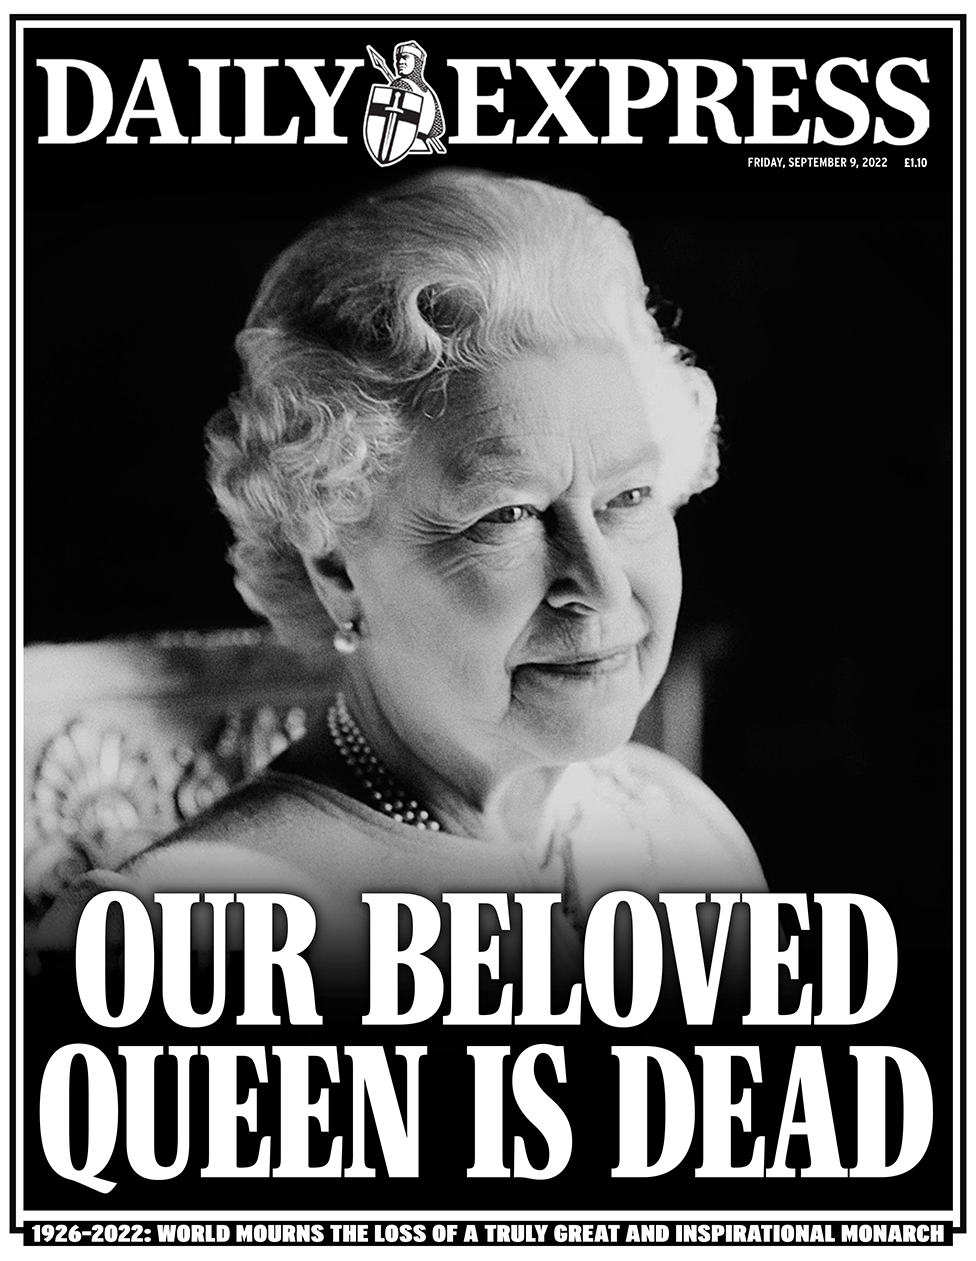 The Daily Express front page